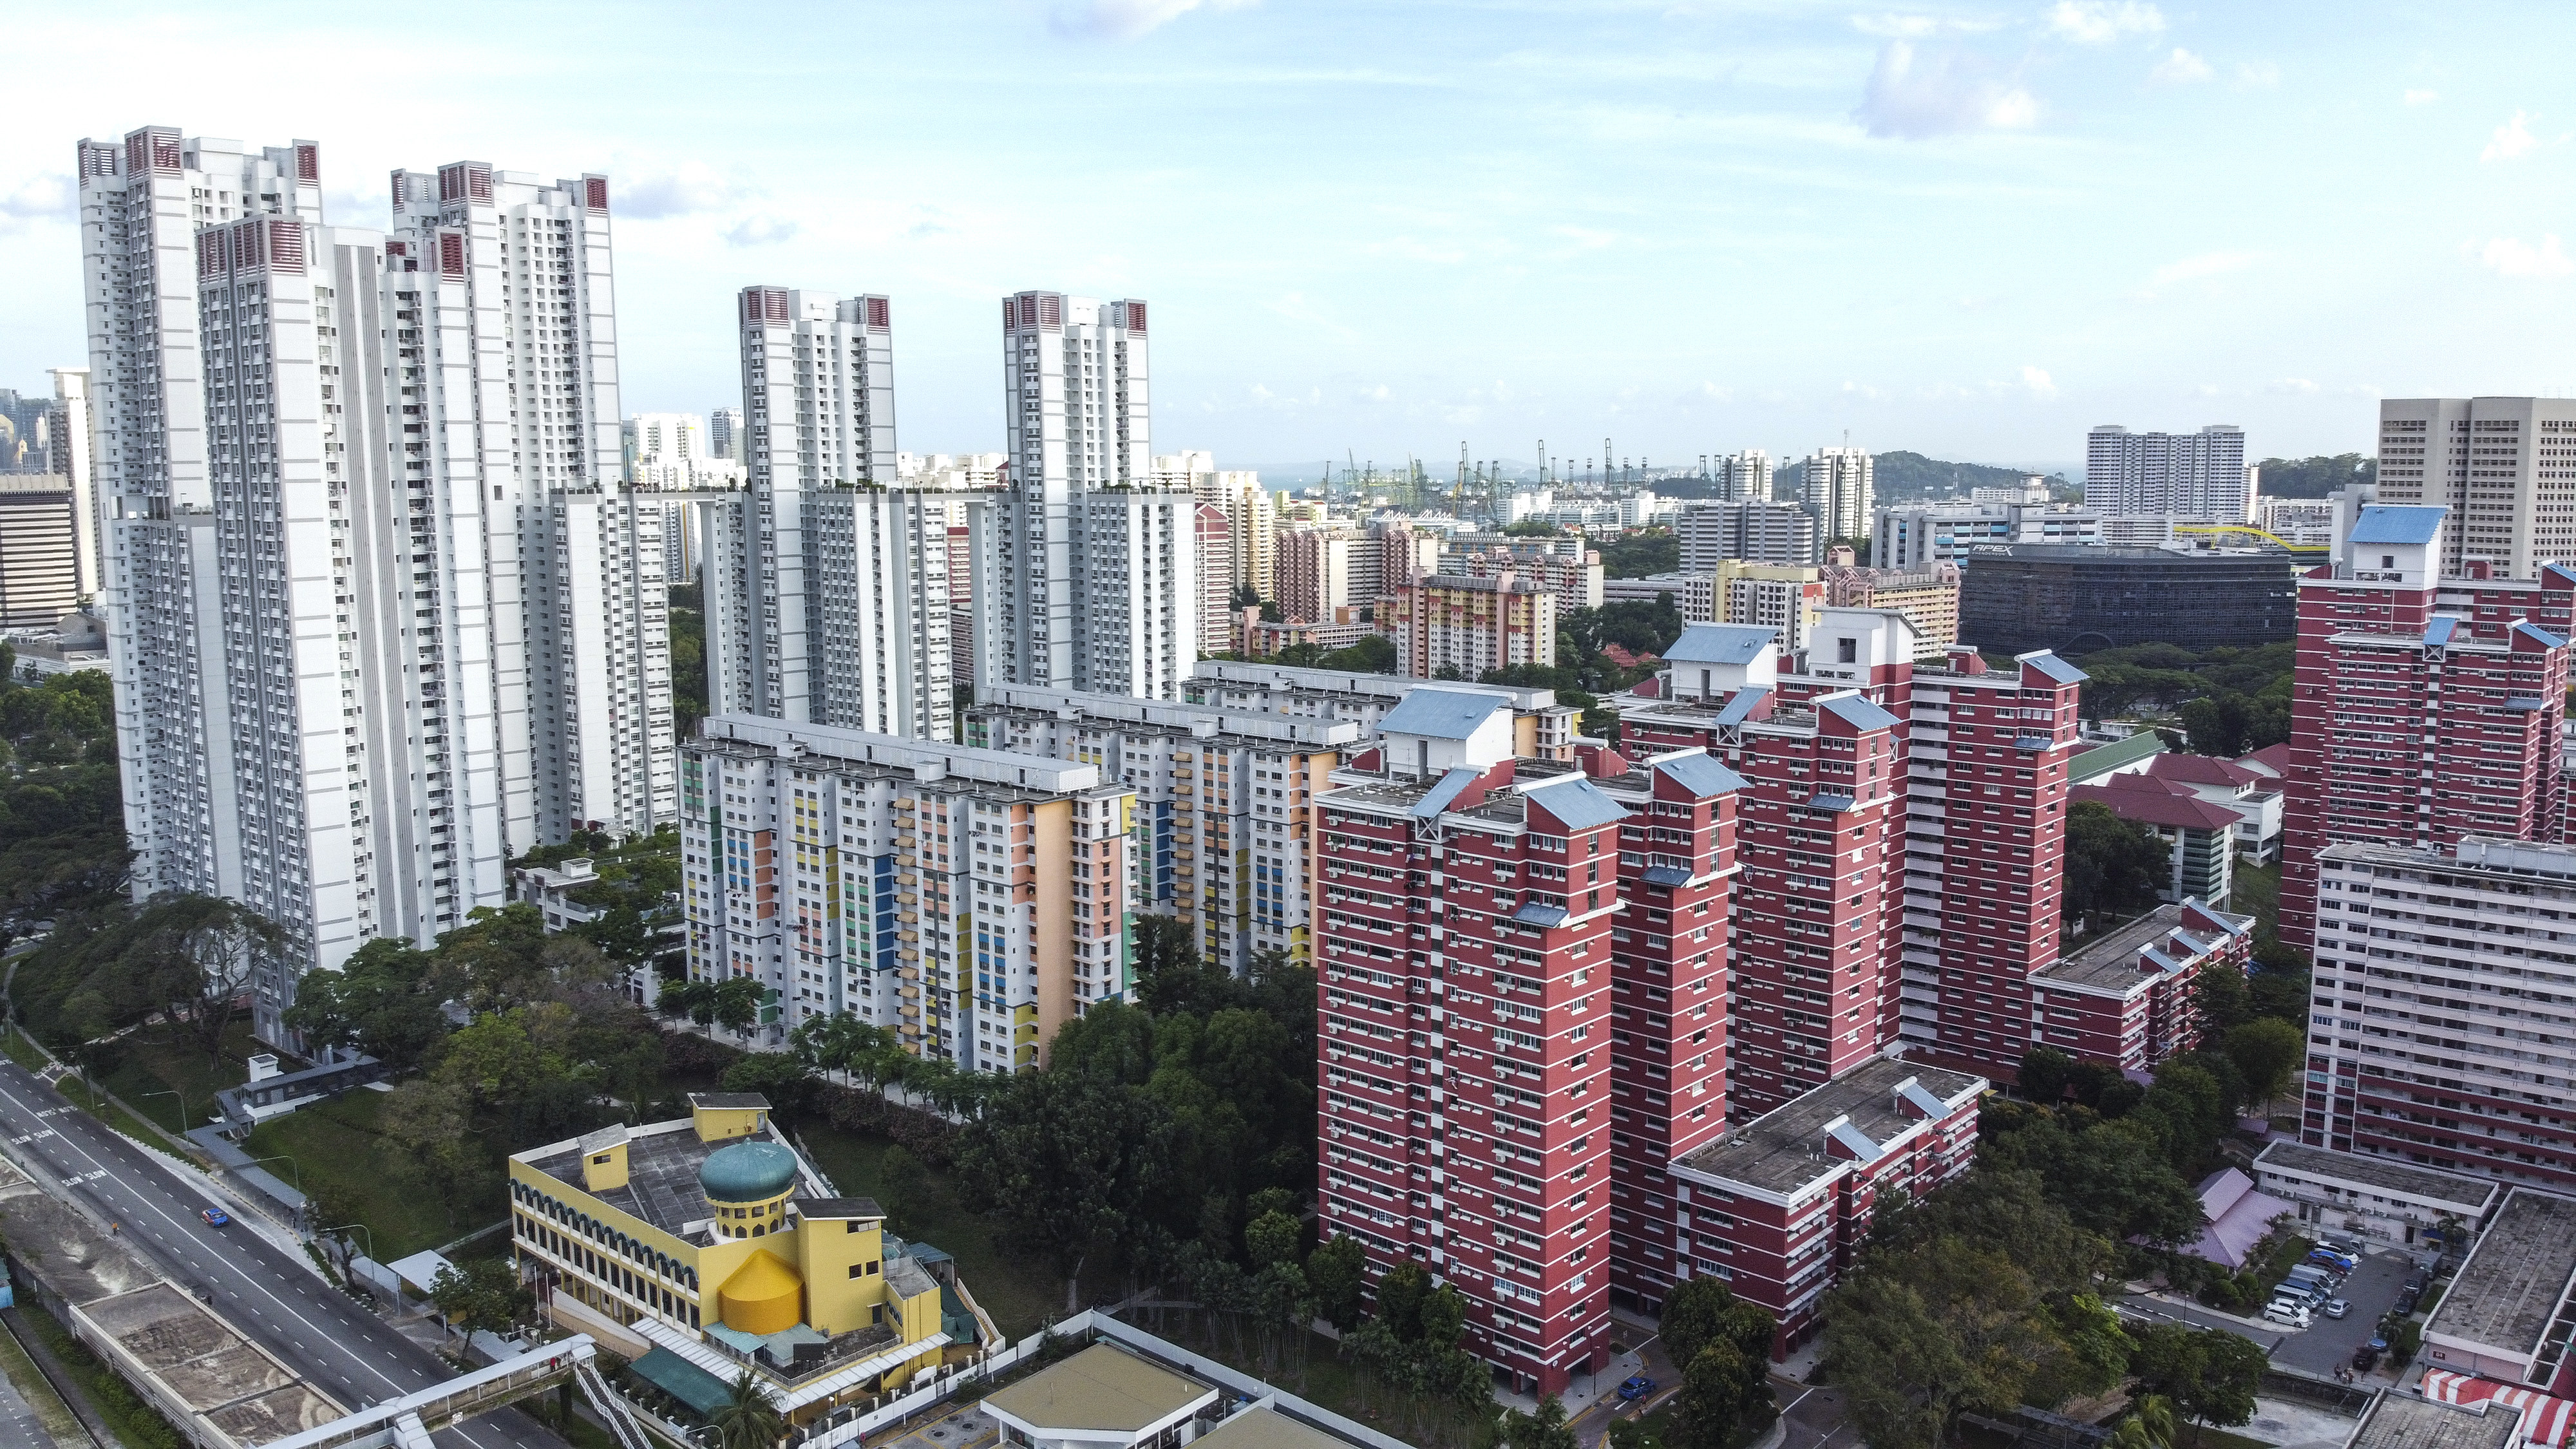 Some 80 per cent of Singapore households live in public housing flats. File photo: SCMP / Roy Issa